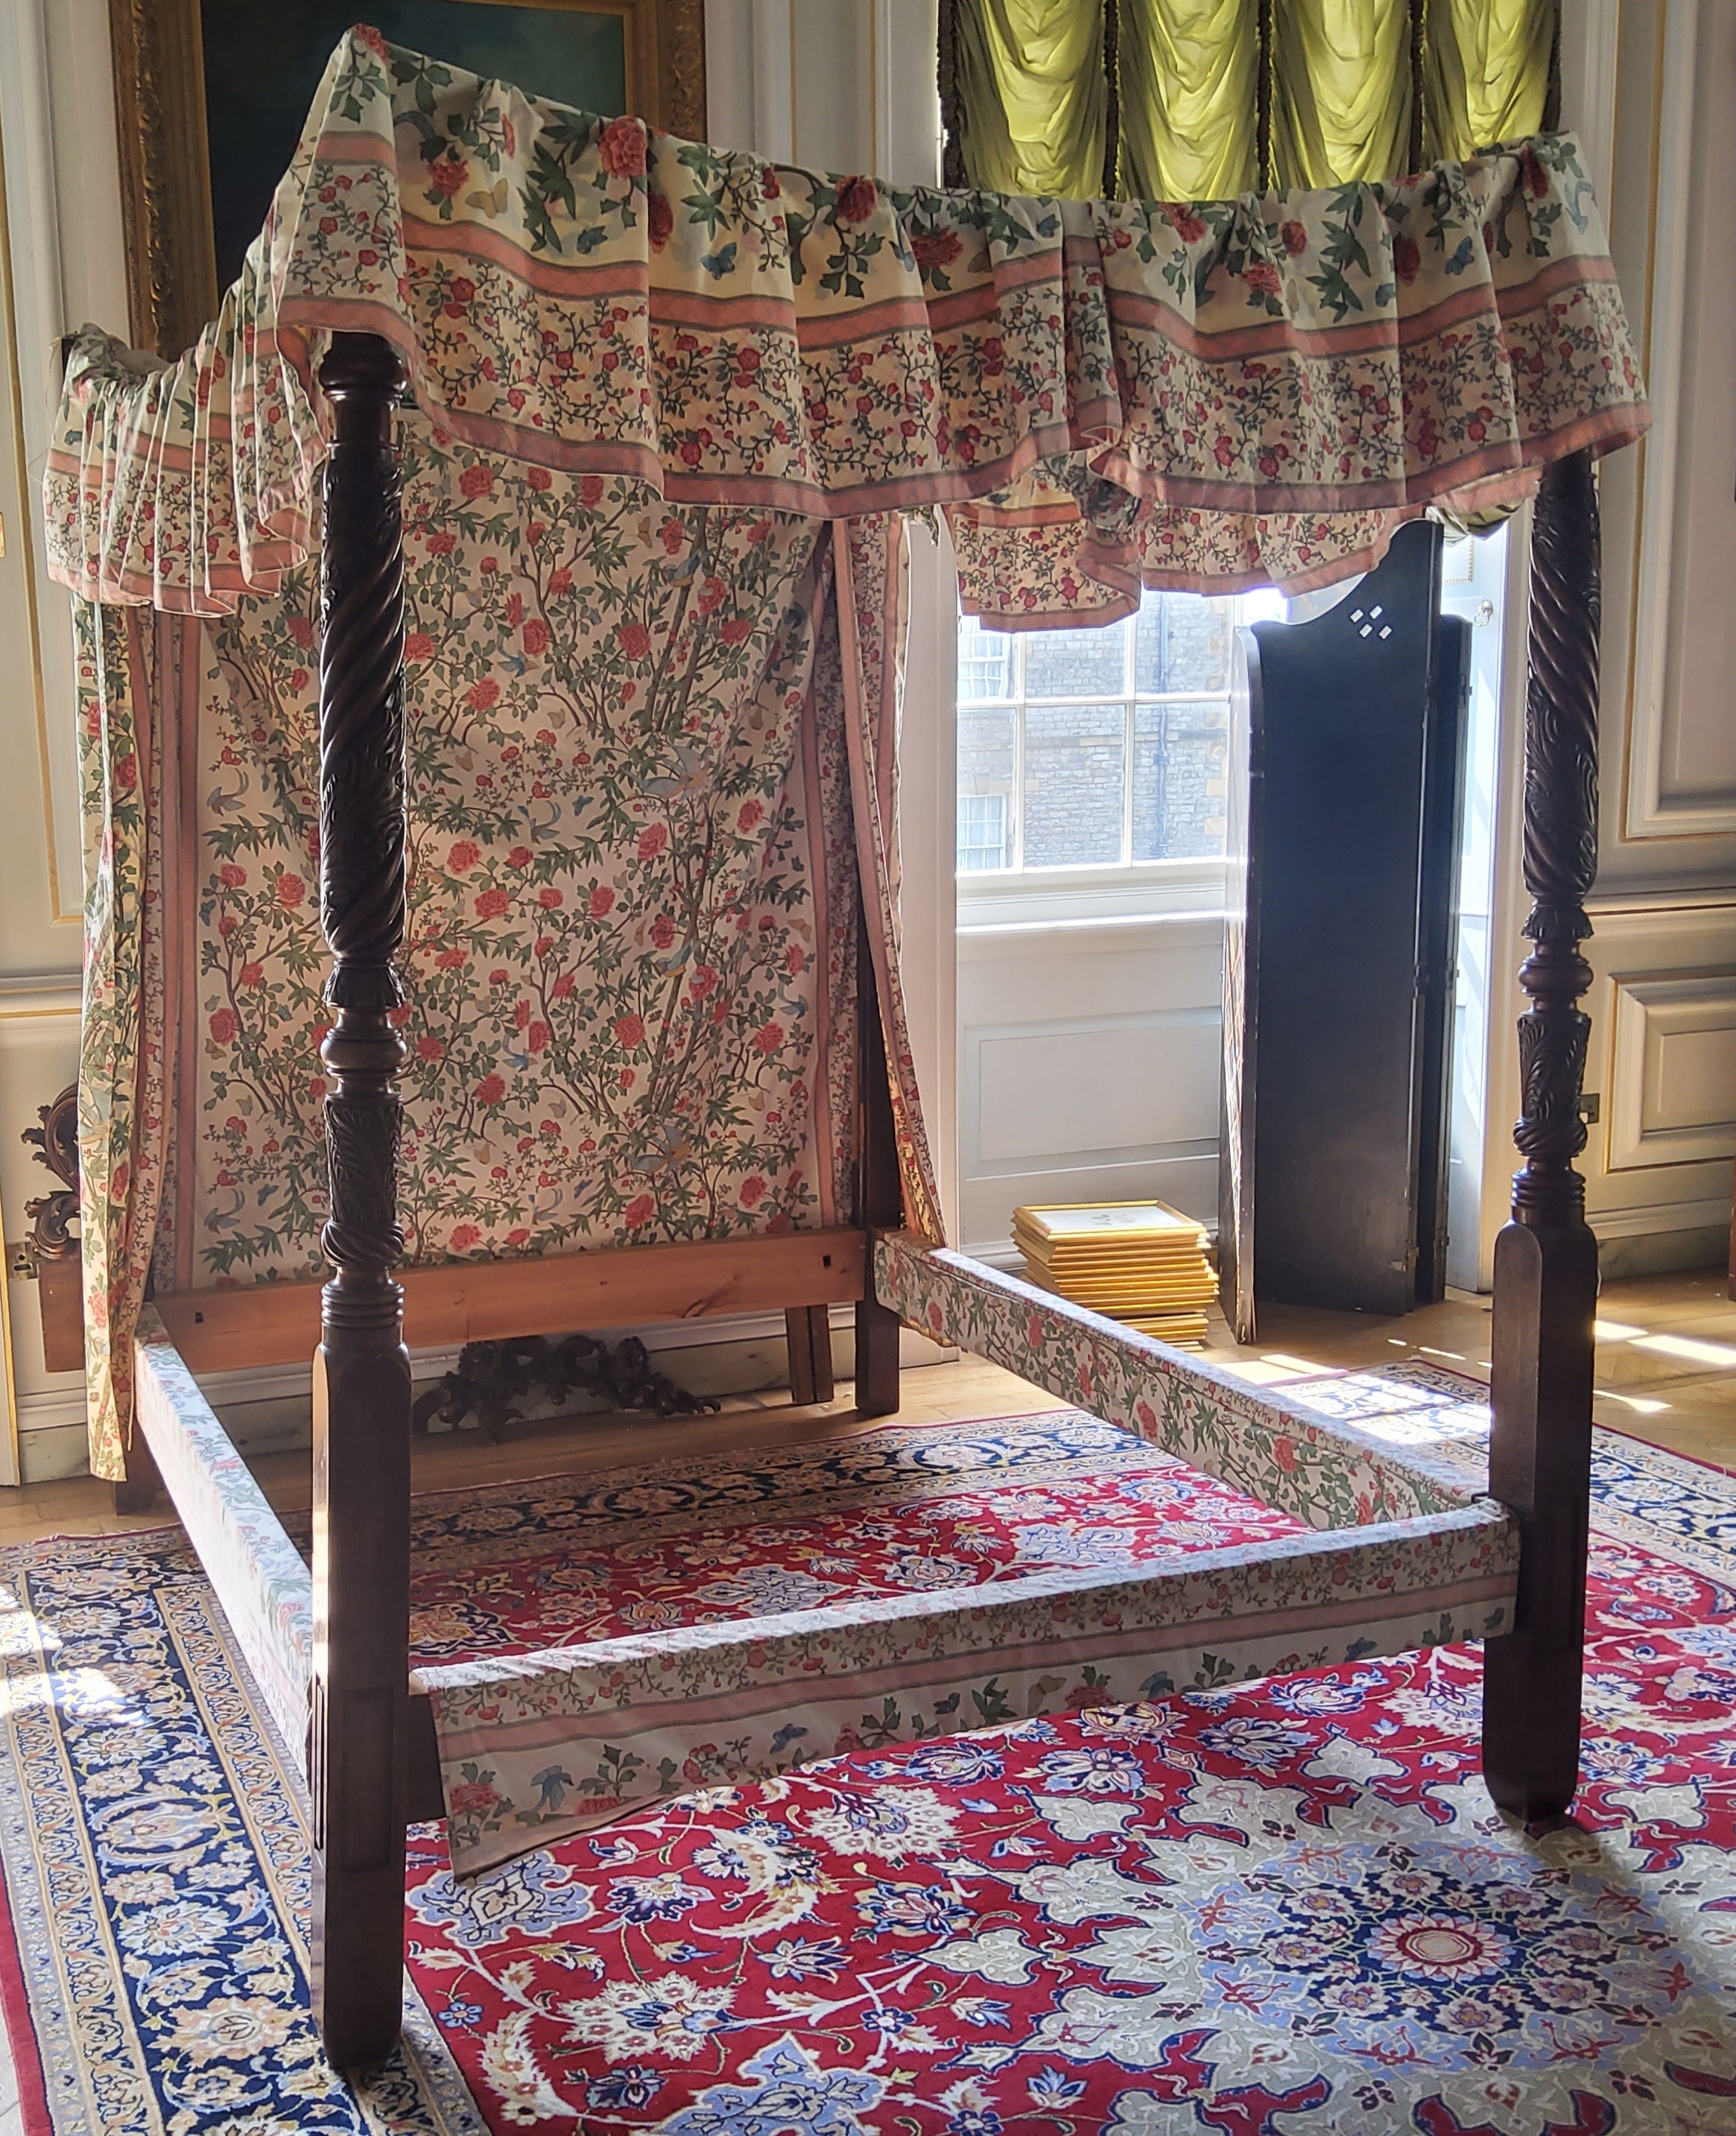 A reproduction Georgian mahogany 'Charleston' tester or four poster bed, with Strawberry thief